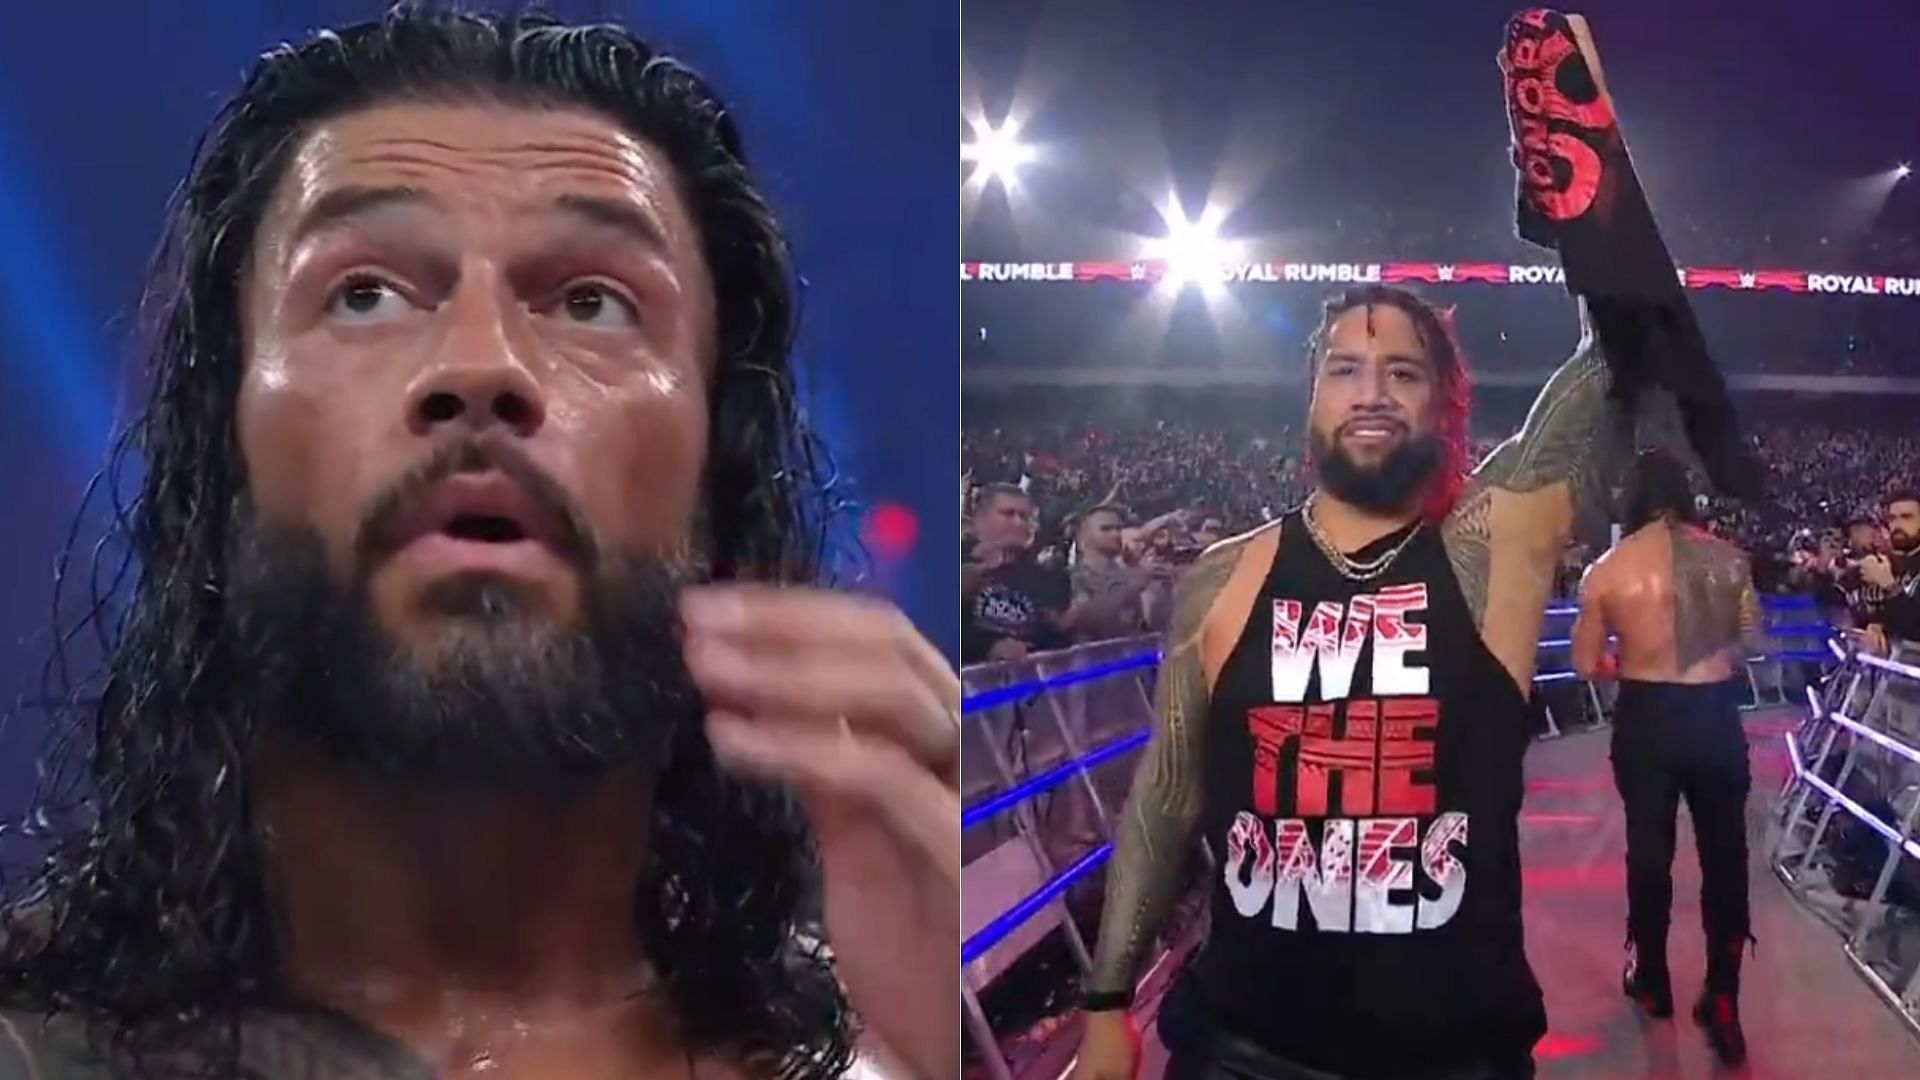 Roman Reigns (left); Jimmy Uso (right)